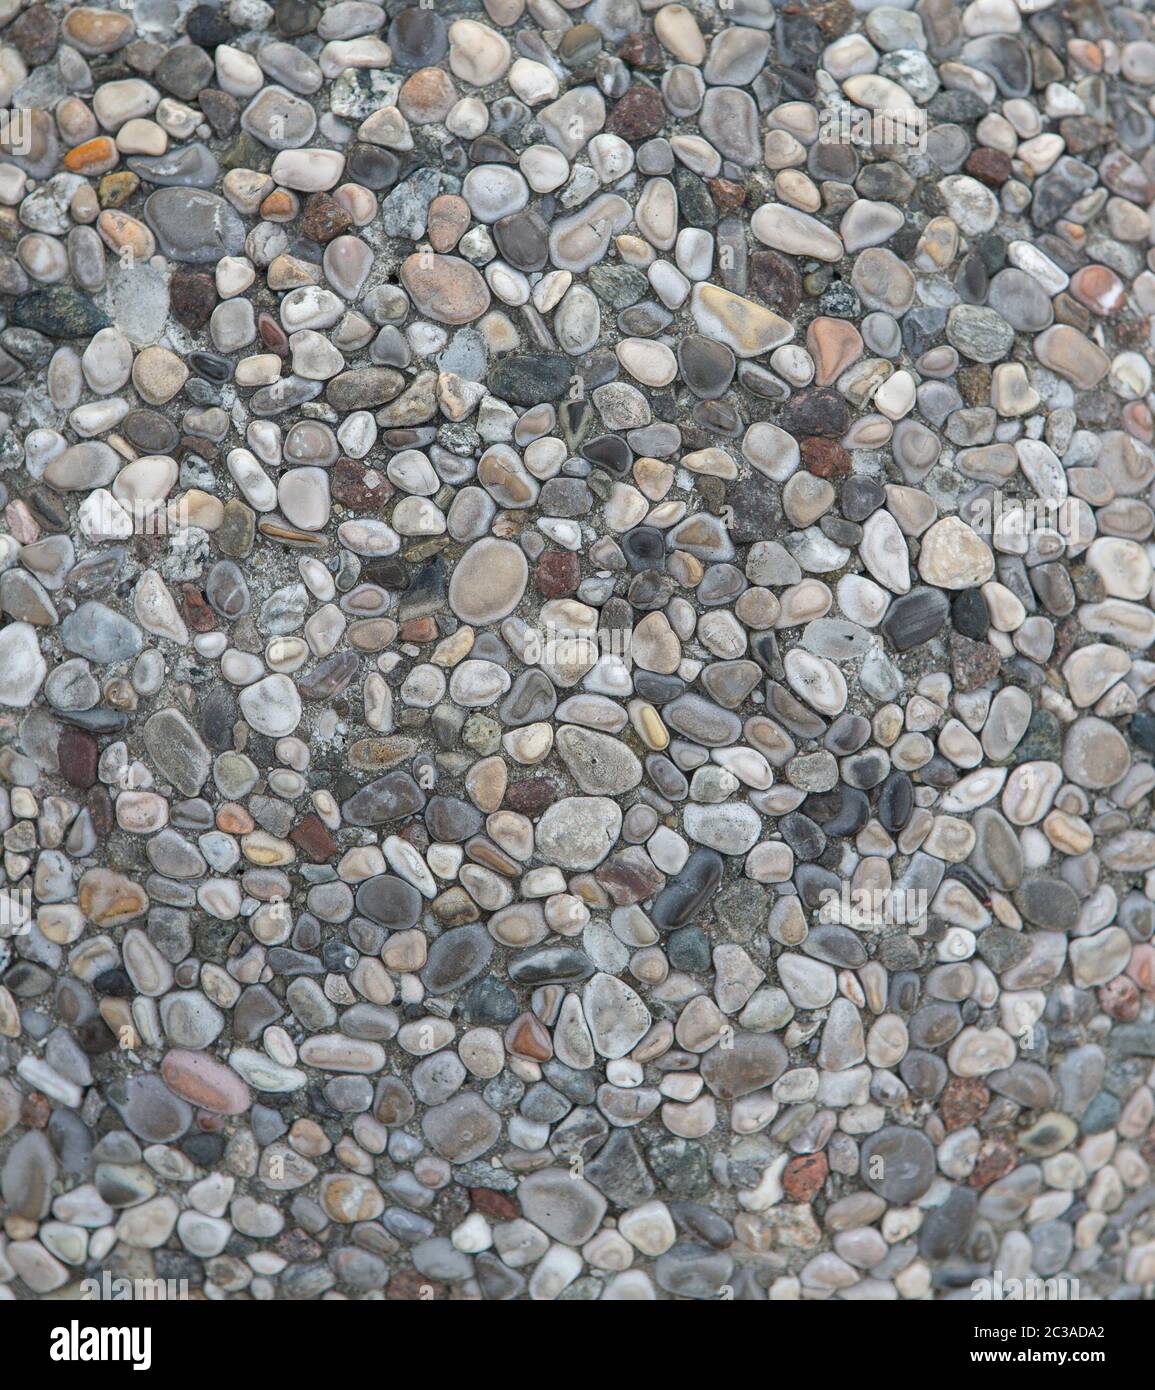 Multi-colored sea pebbles at pathway outdoors. Small round stones are in cement mortar. Selective focus at centre of image. Abstract texture or Stock Photo